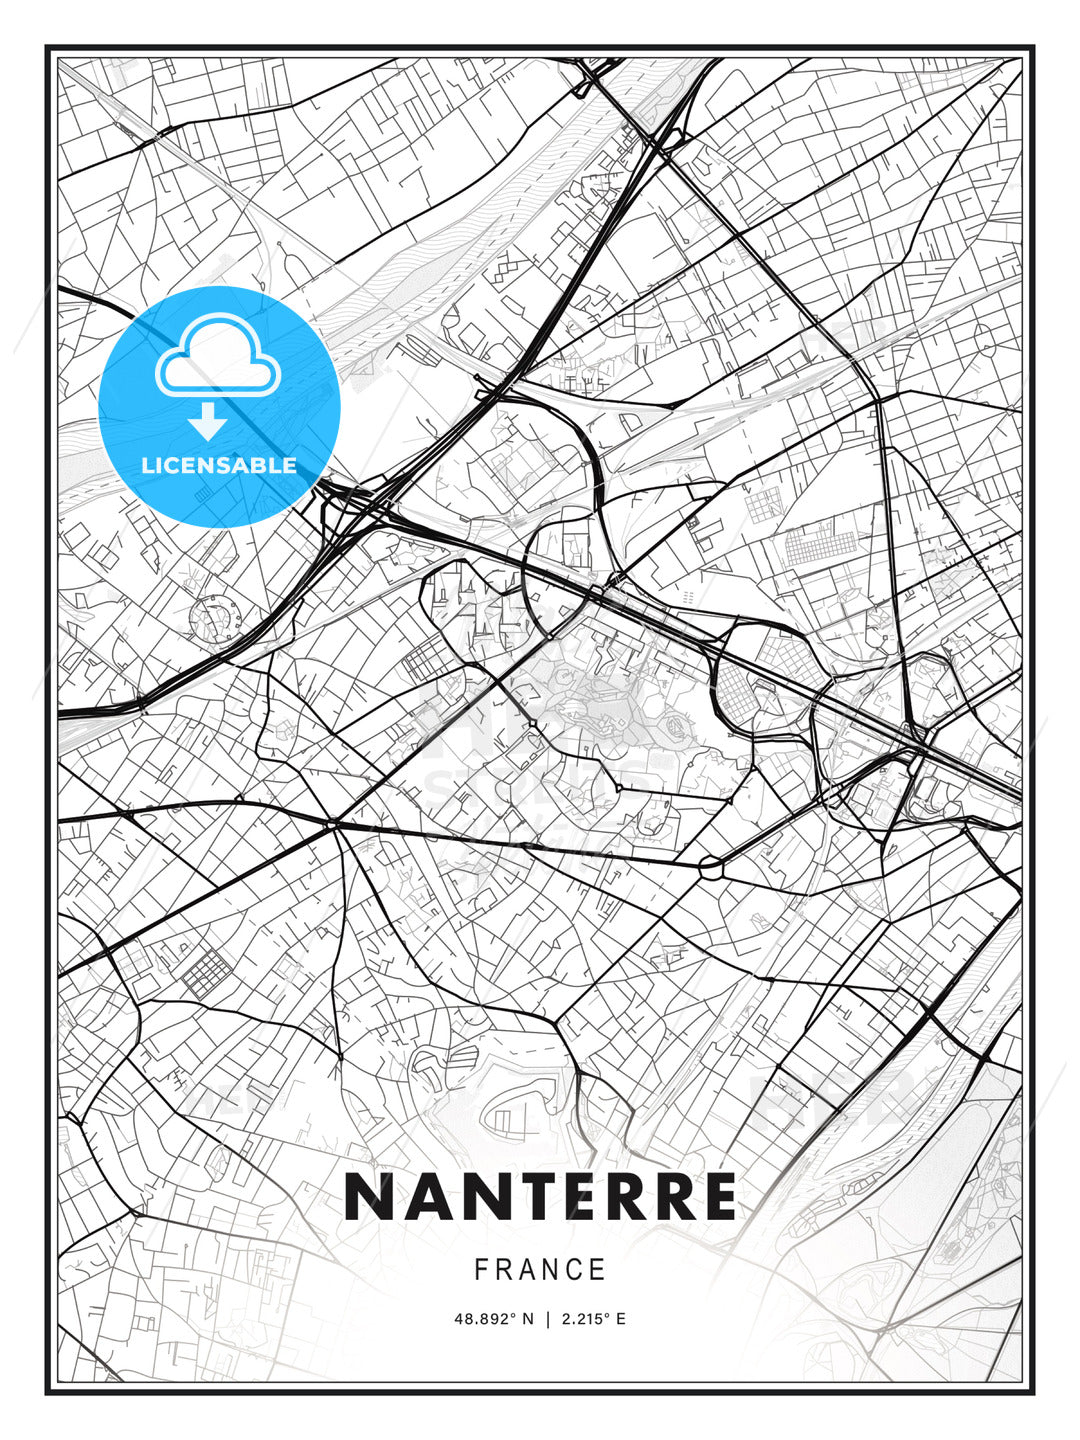 Nanterre, France, Modern Print Template in Various Formats - HEBSTREITS Sketches